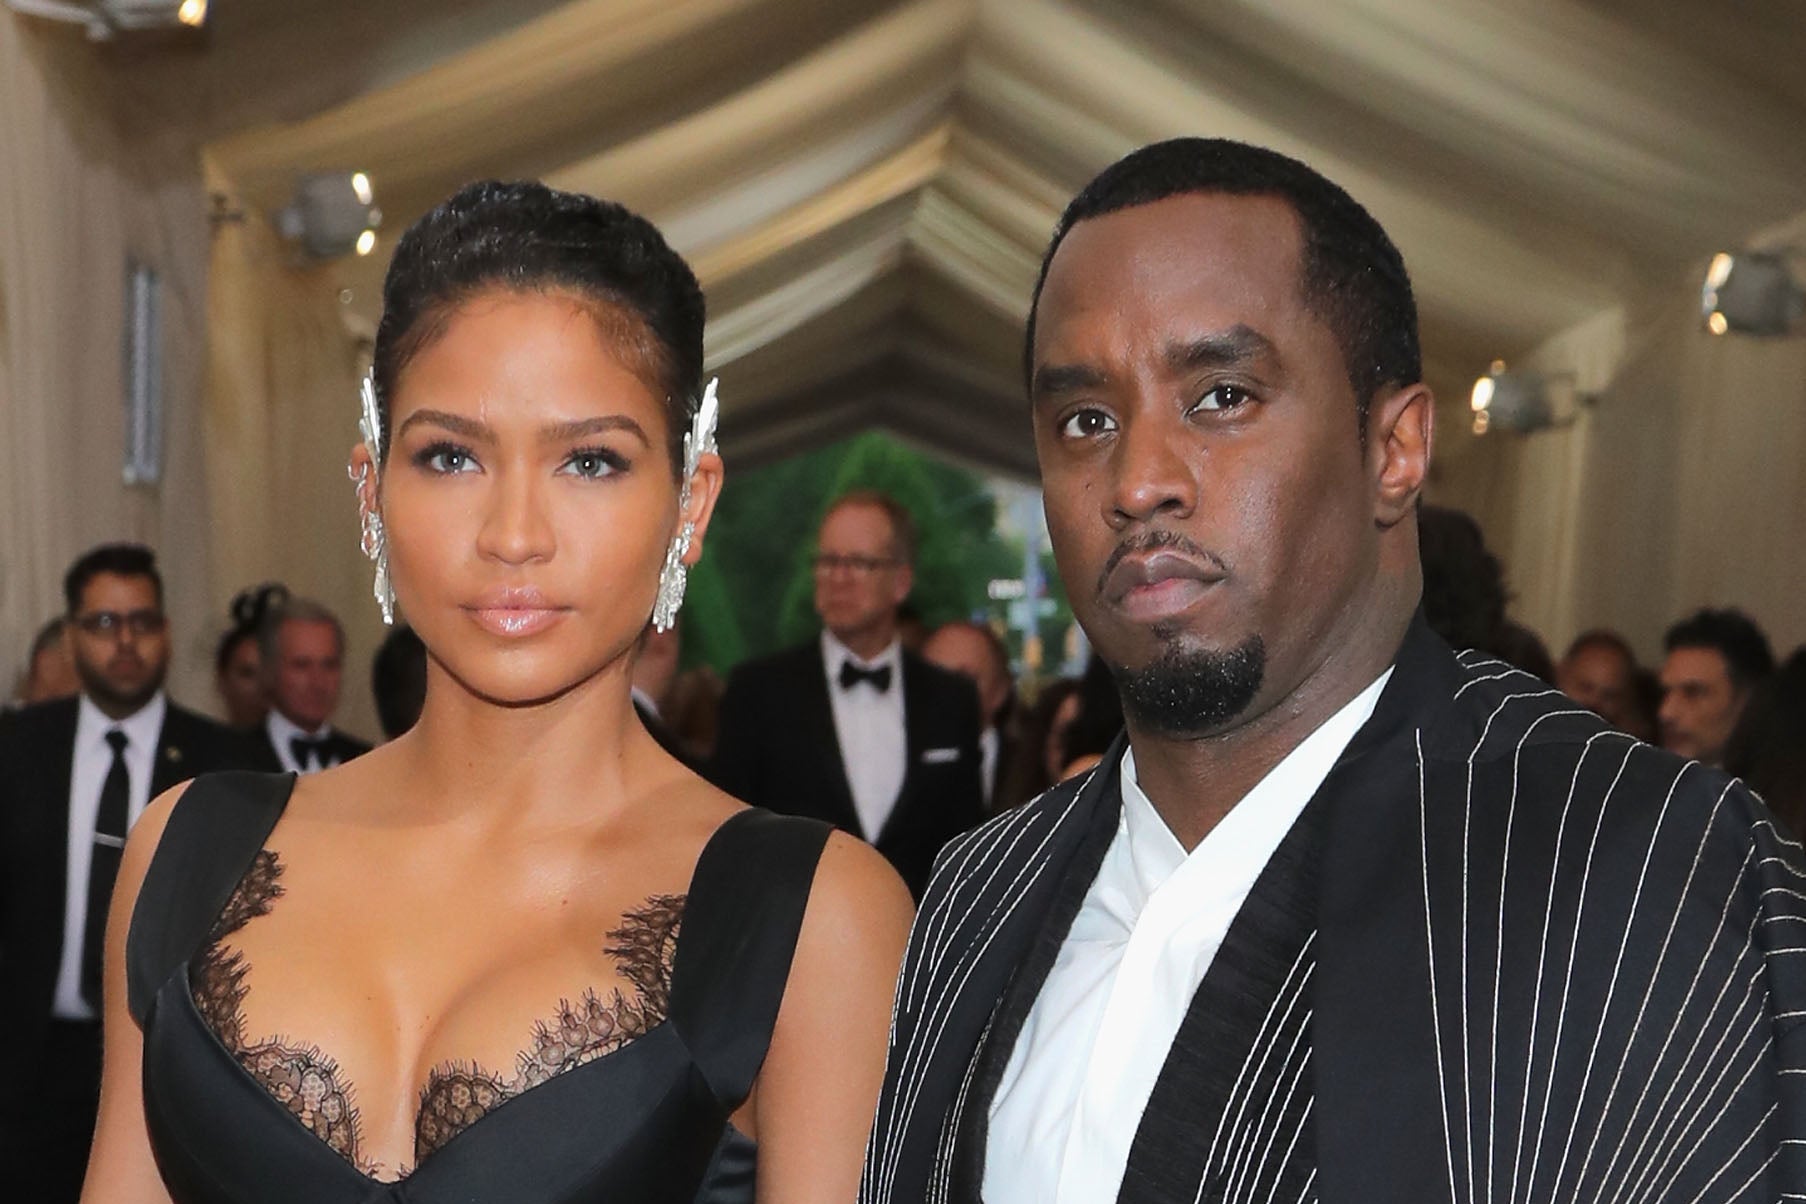 Cassie (left) and Sean “Diddy” Combs at the 2017 Met Gala